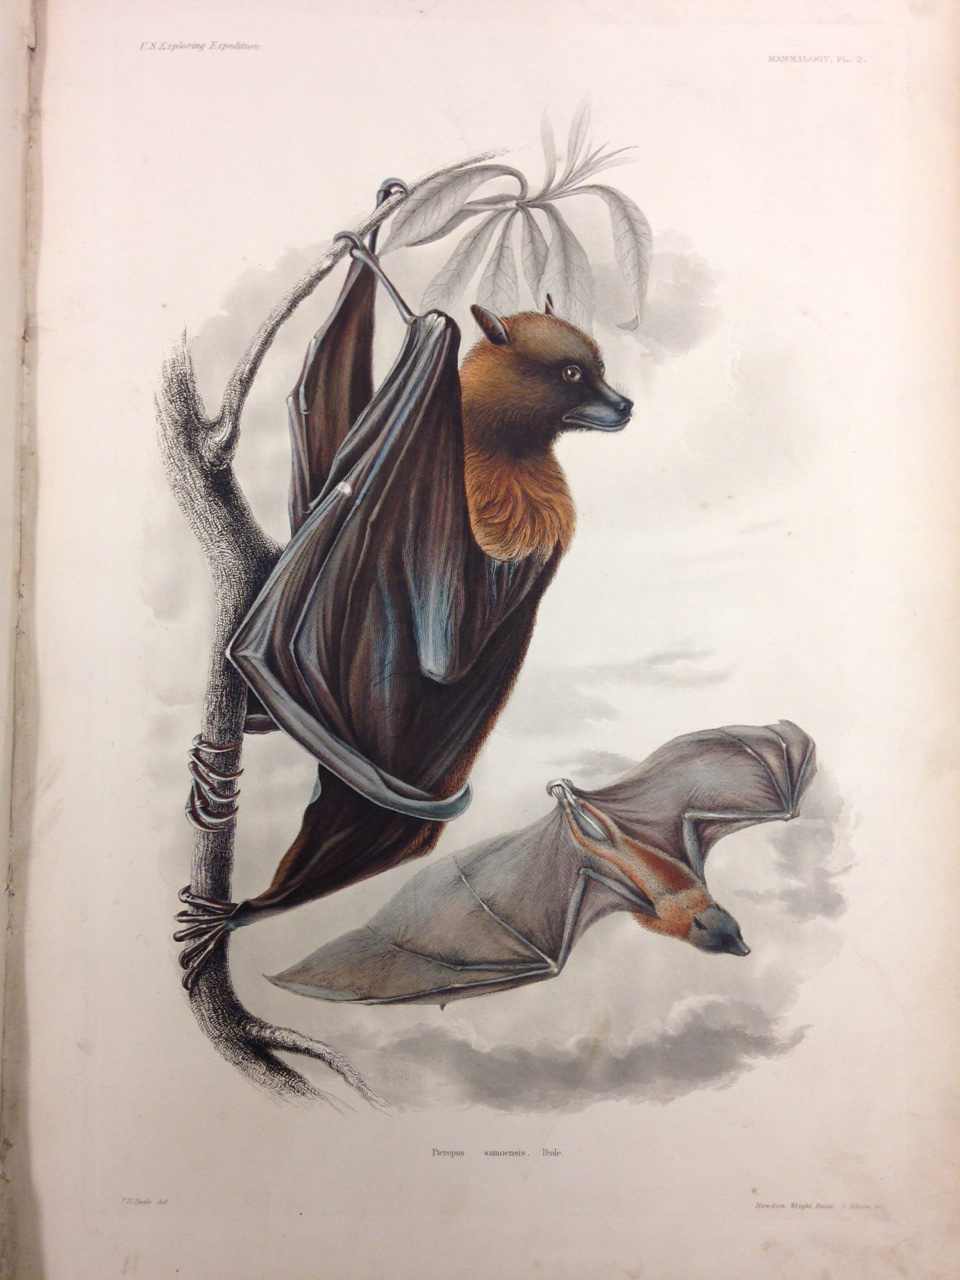 Mammalogy, Plate 2: Pteropus samoensis (Samoan Flying Fox). – They might look scary, but you can sleep easy knowing these bats are vegetarians!